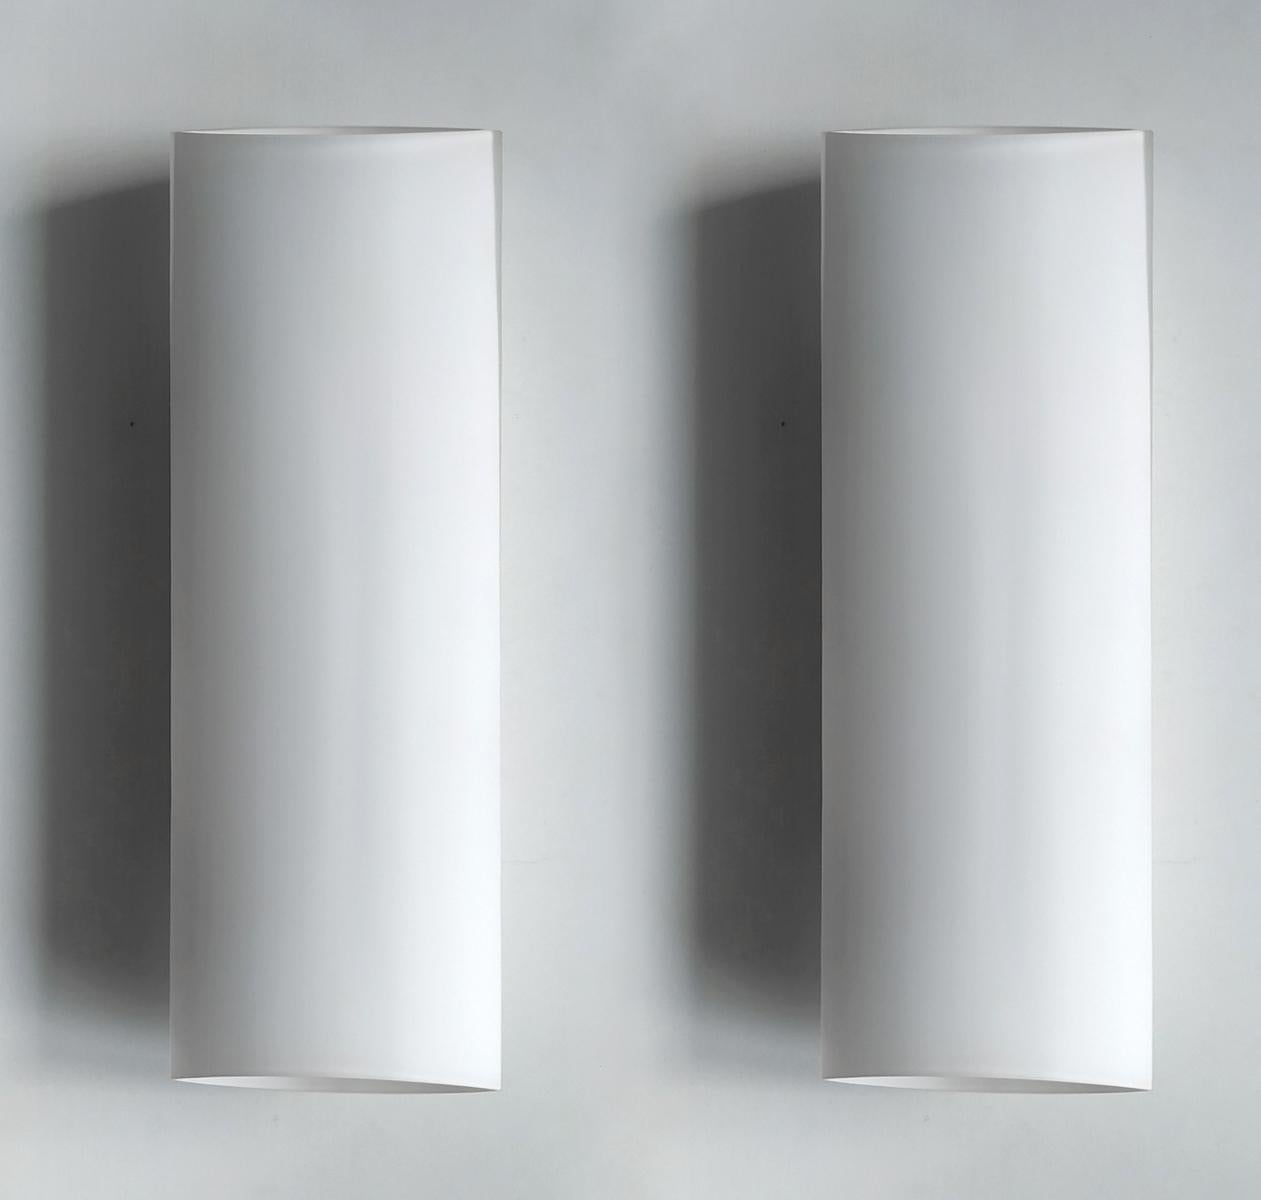 One of... large matte white glass sconce,
Germany, 1970s - 1980s
Lamp sockets: 2.

